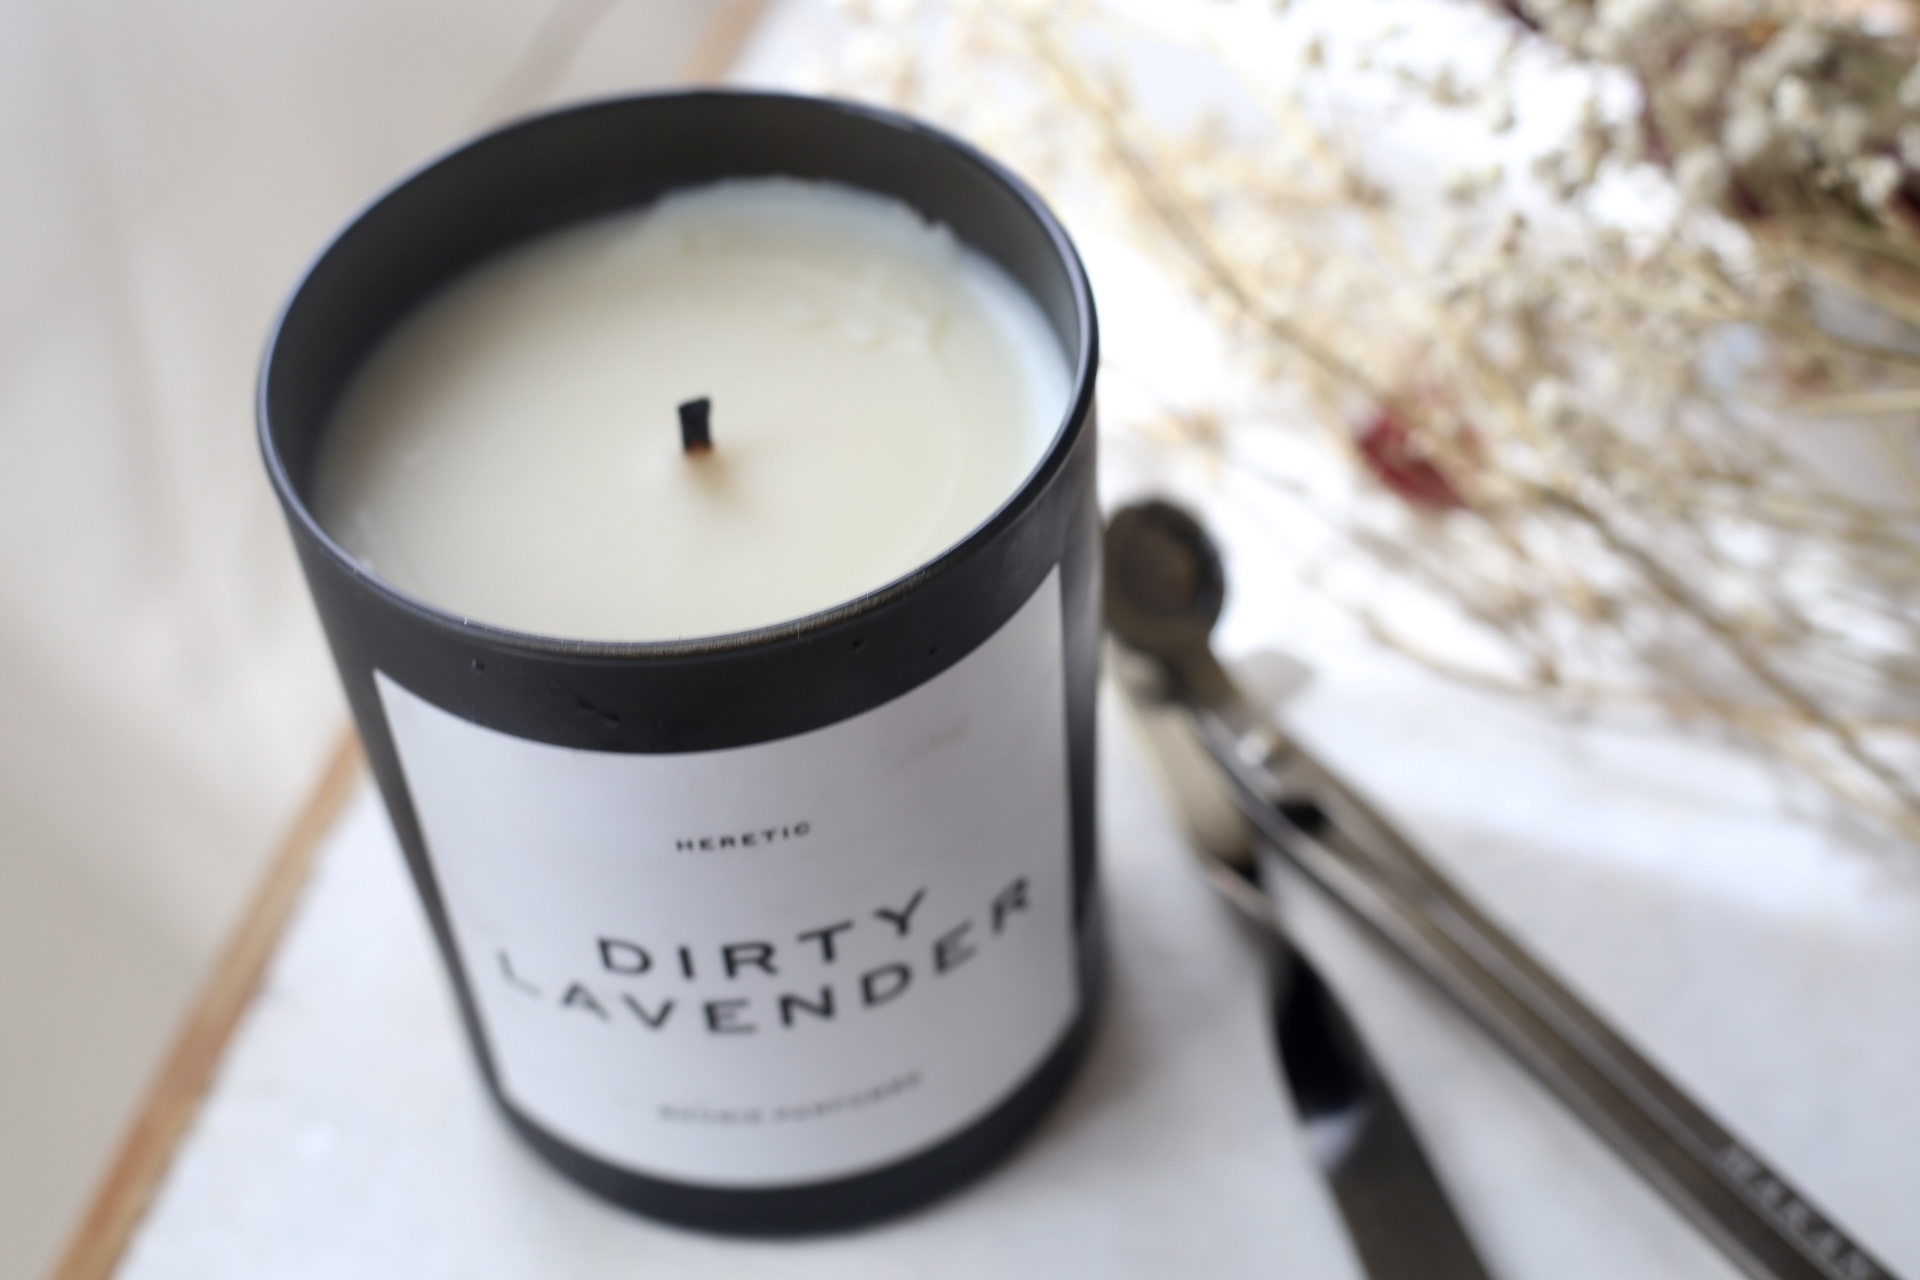 Heretic parfum candle